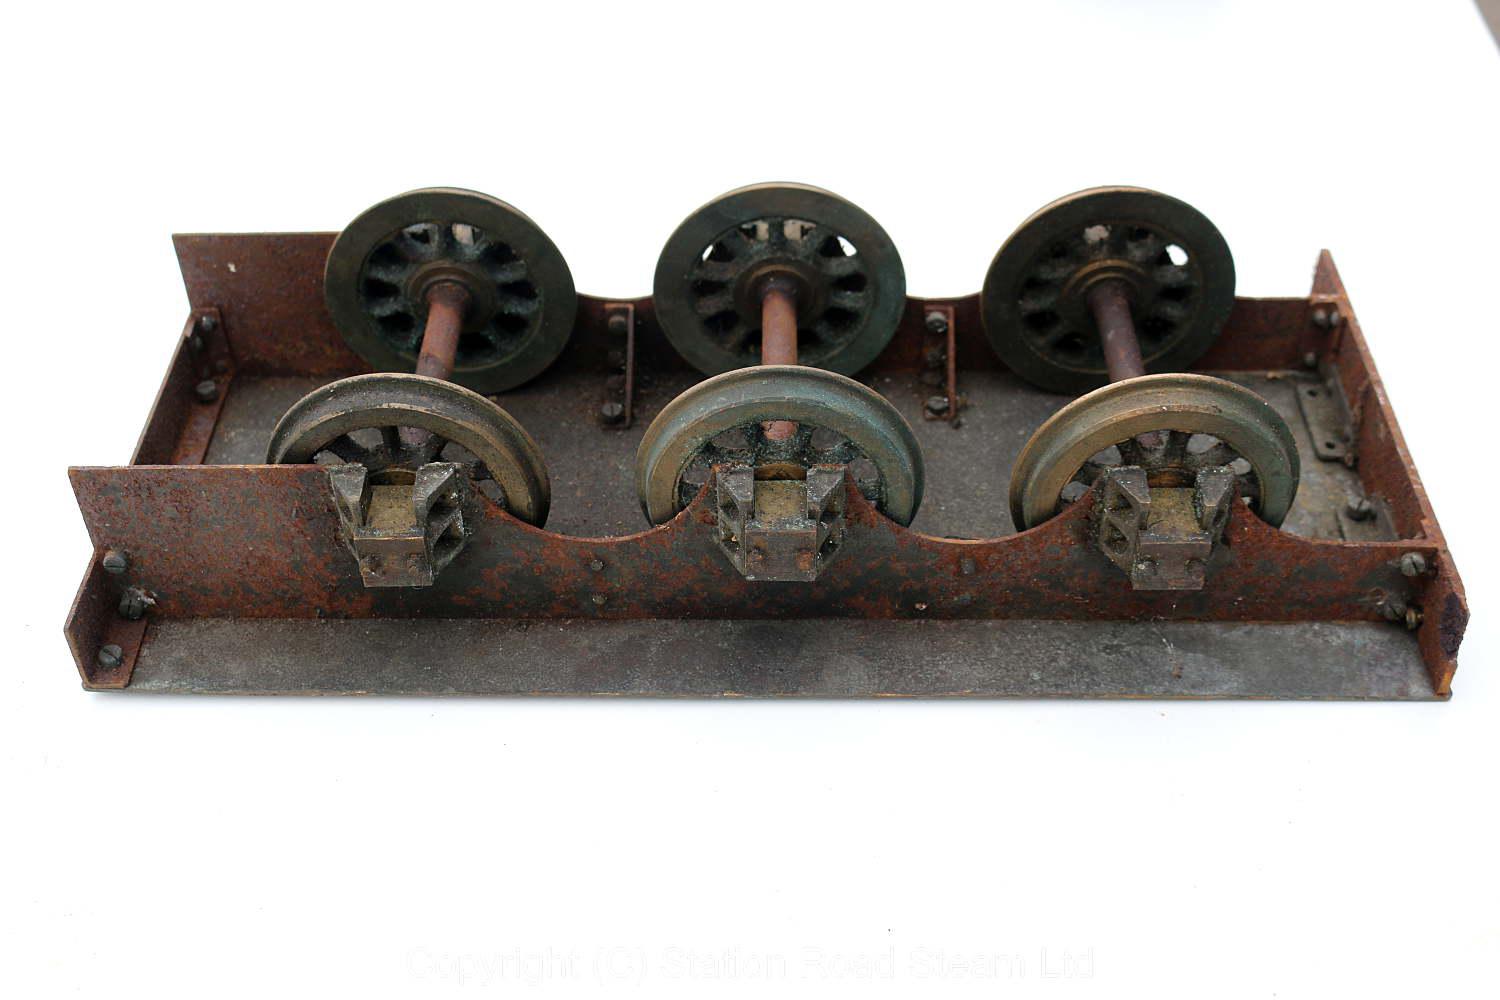 Ancient 3 1/2 inch gauge Atlantic chassis with boiler